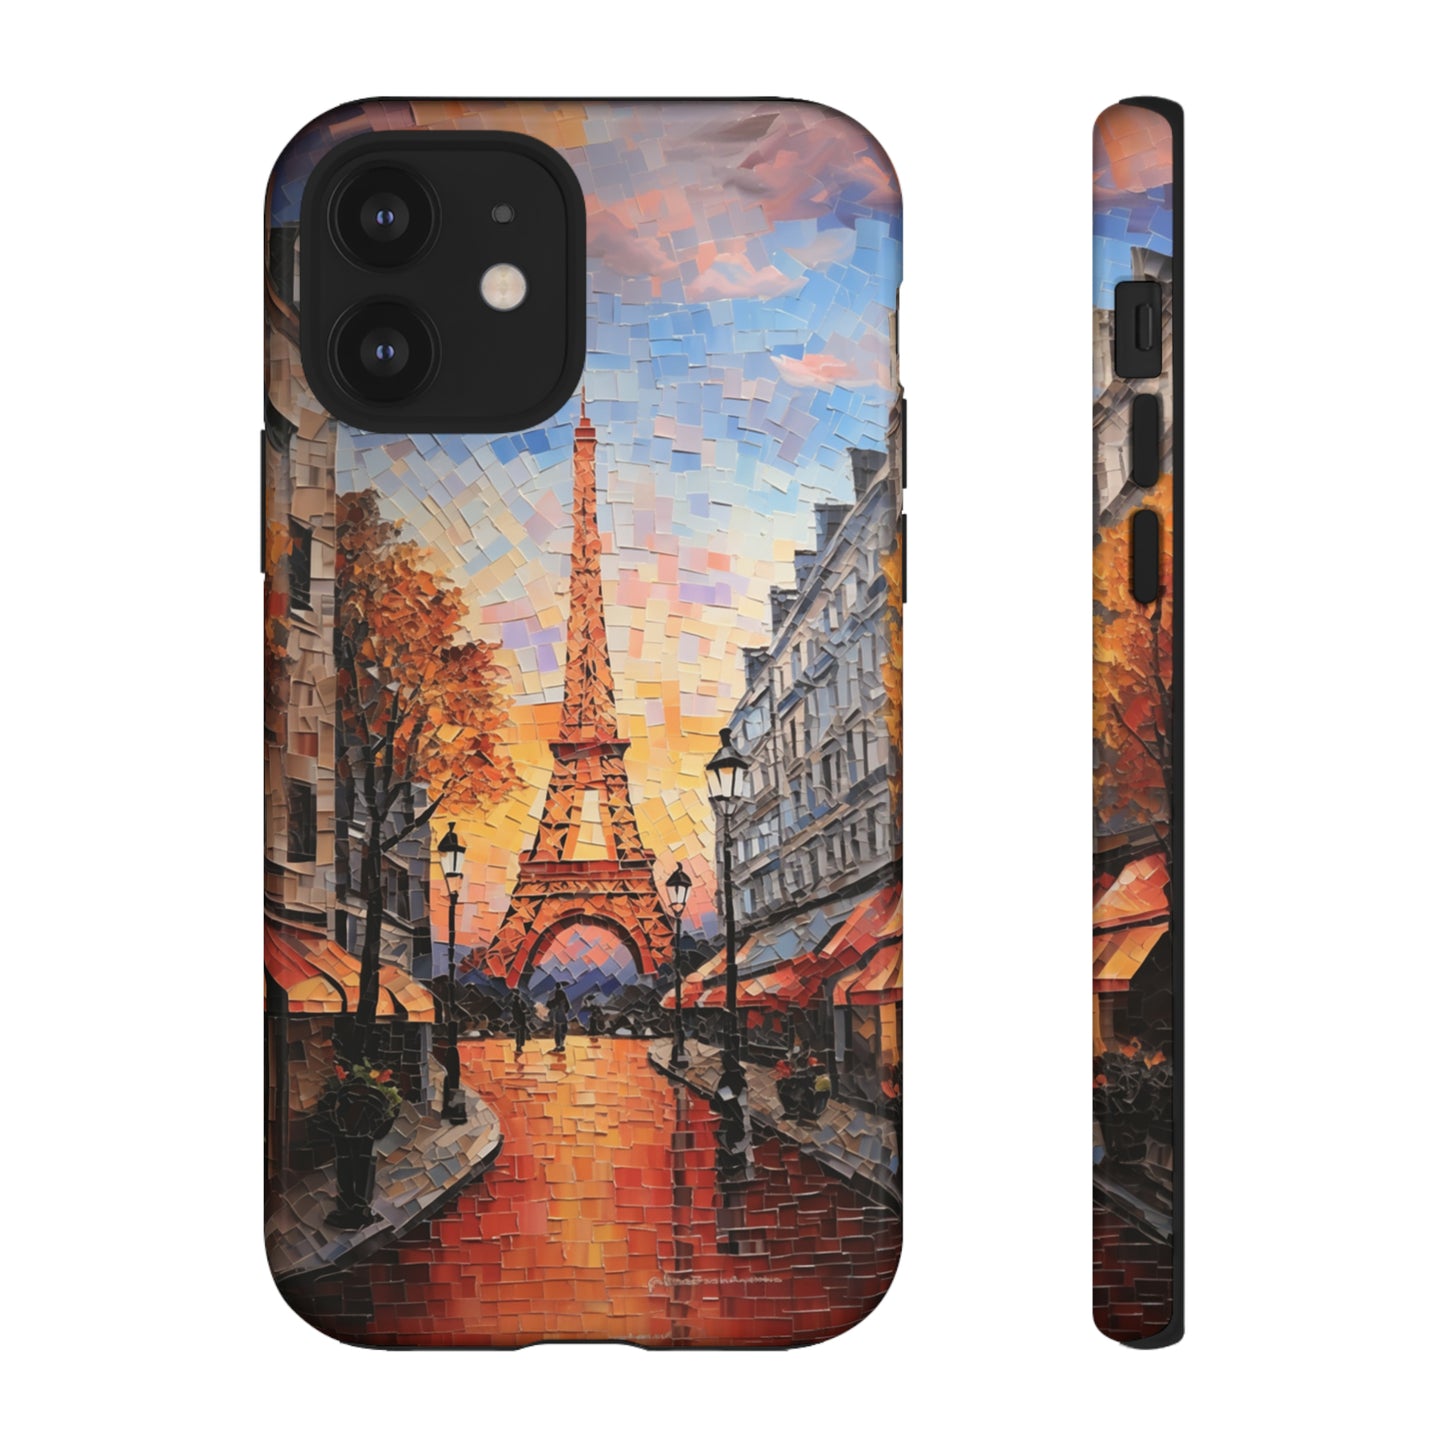 France iPhone case